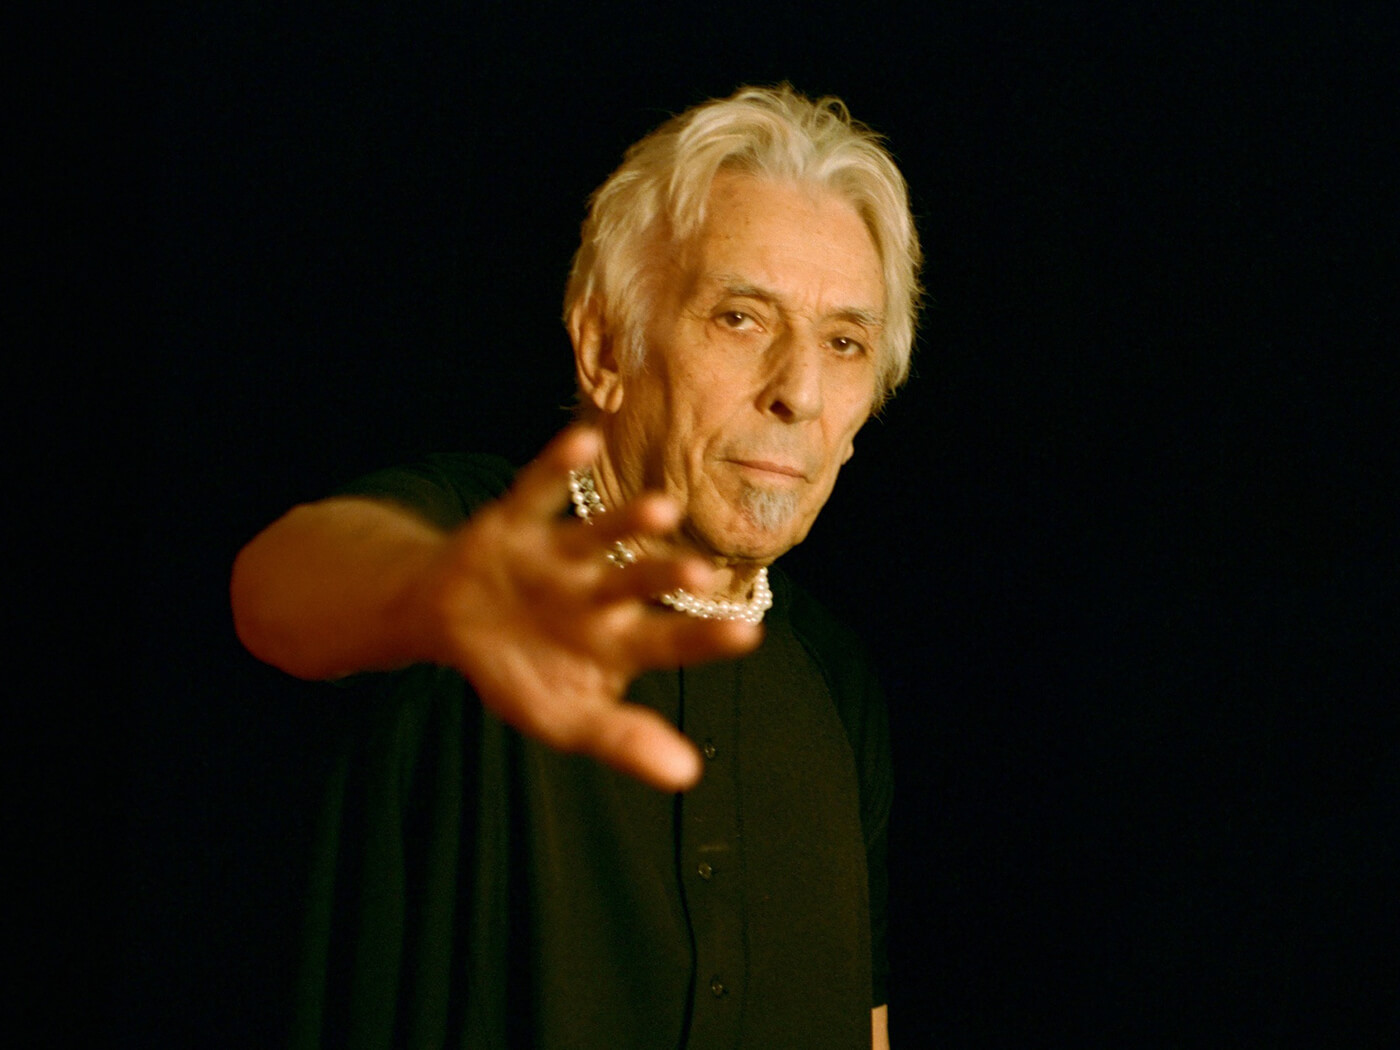 John Cale announces first new album in a decade Mercy and shares Weyes Blood collaboration “Story Of Blood”